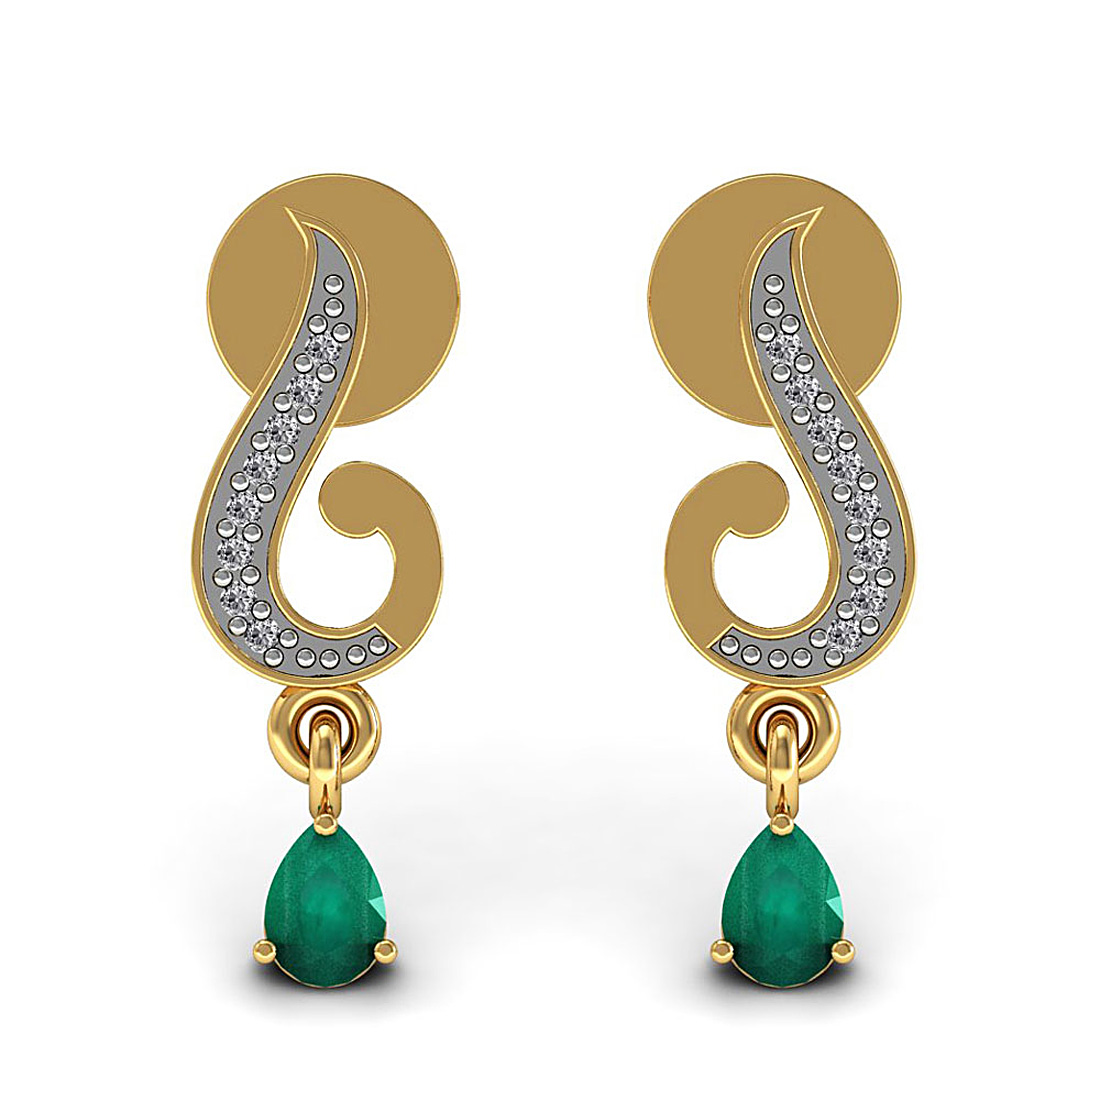 18k solid gold drop stud earrings with real diamond & emerald